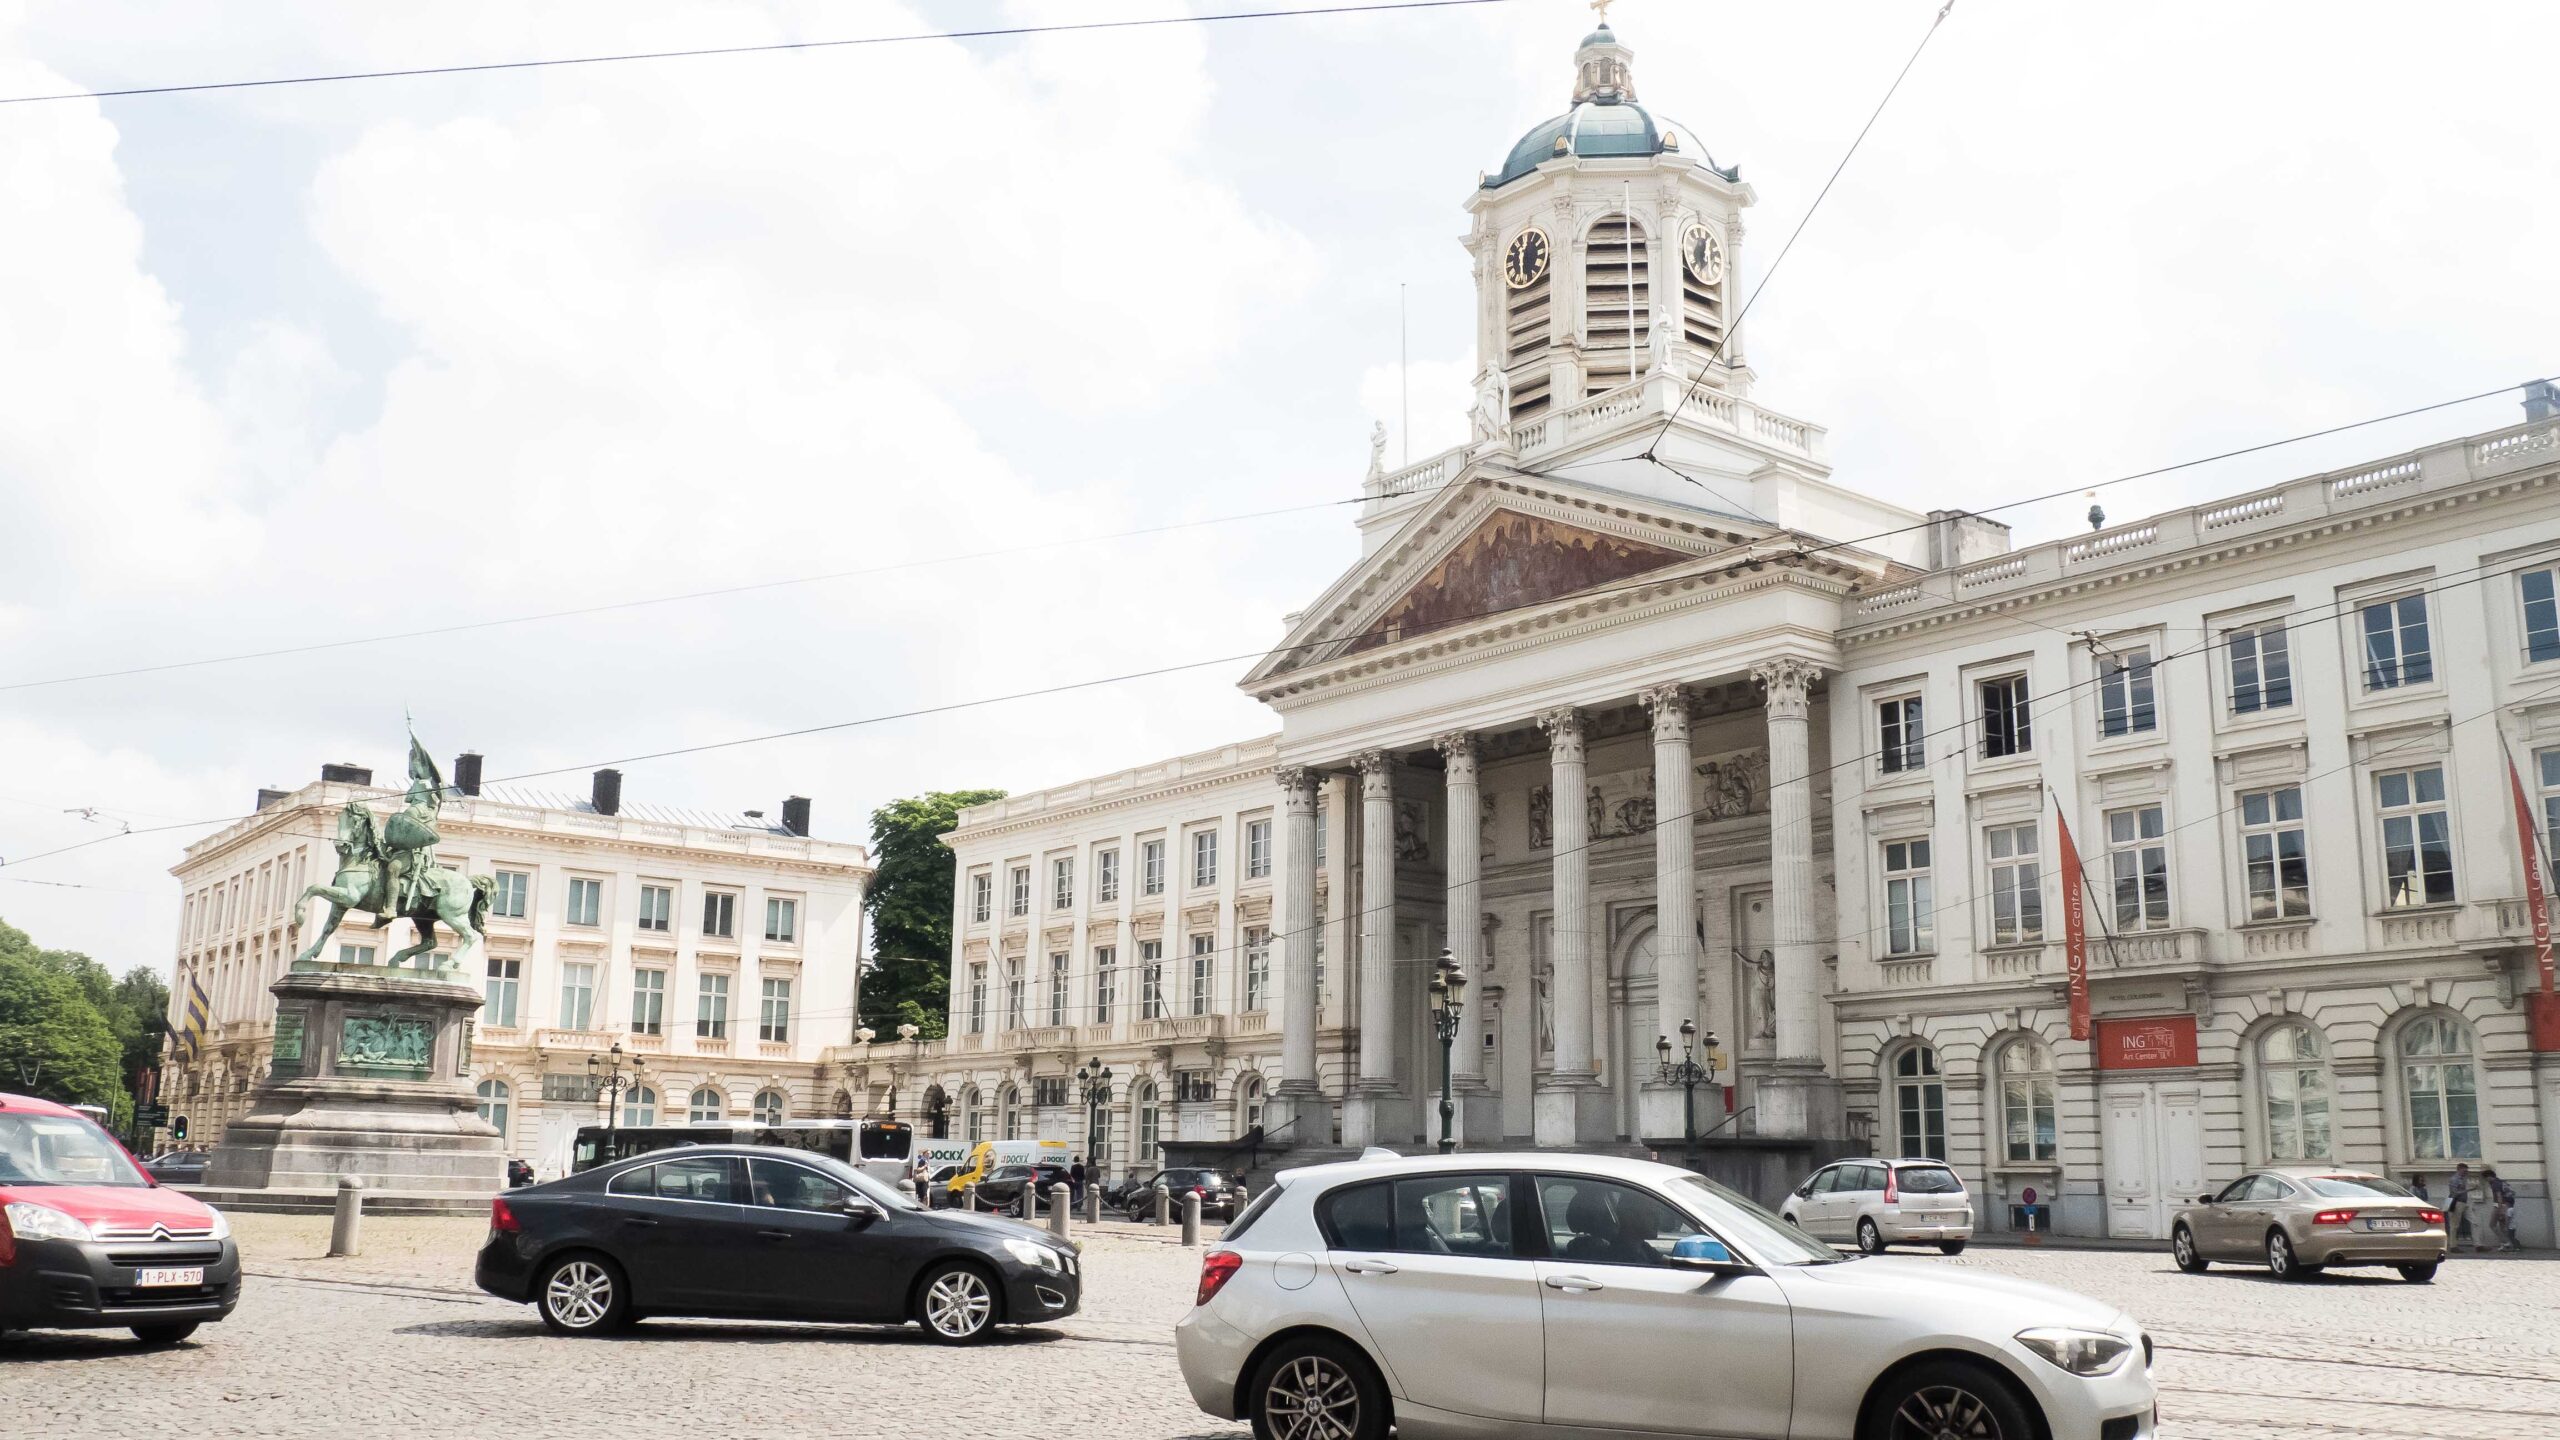 Jordan Taylor C - An Insider's Guide to Brussels, the hotel review, brussels, travel, travel blog, lifestyle blog, lifestyle, the hotel, hotel review, review, travel review, brussels travel, brussels hotel, travel q&A